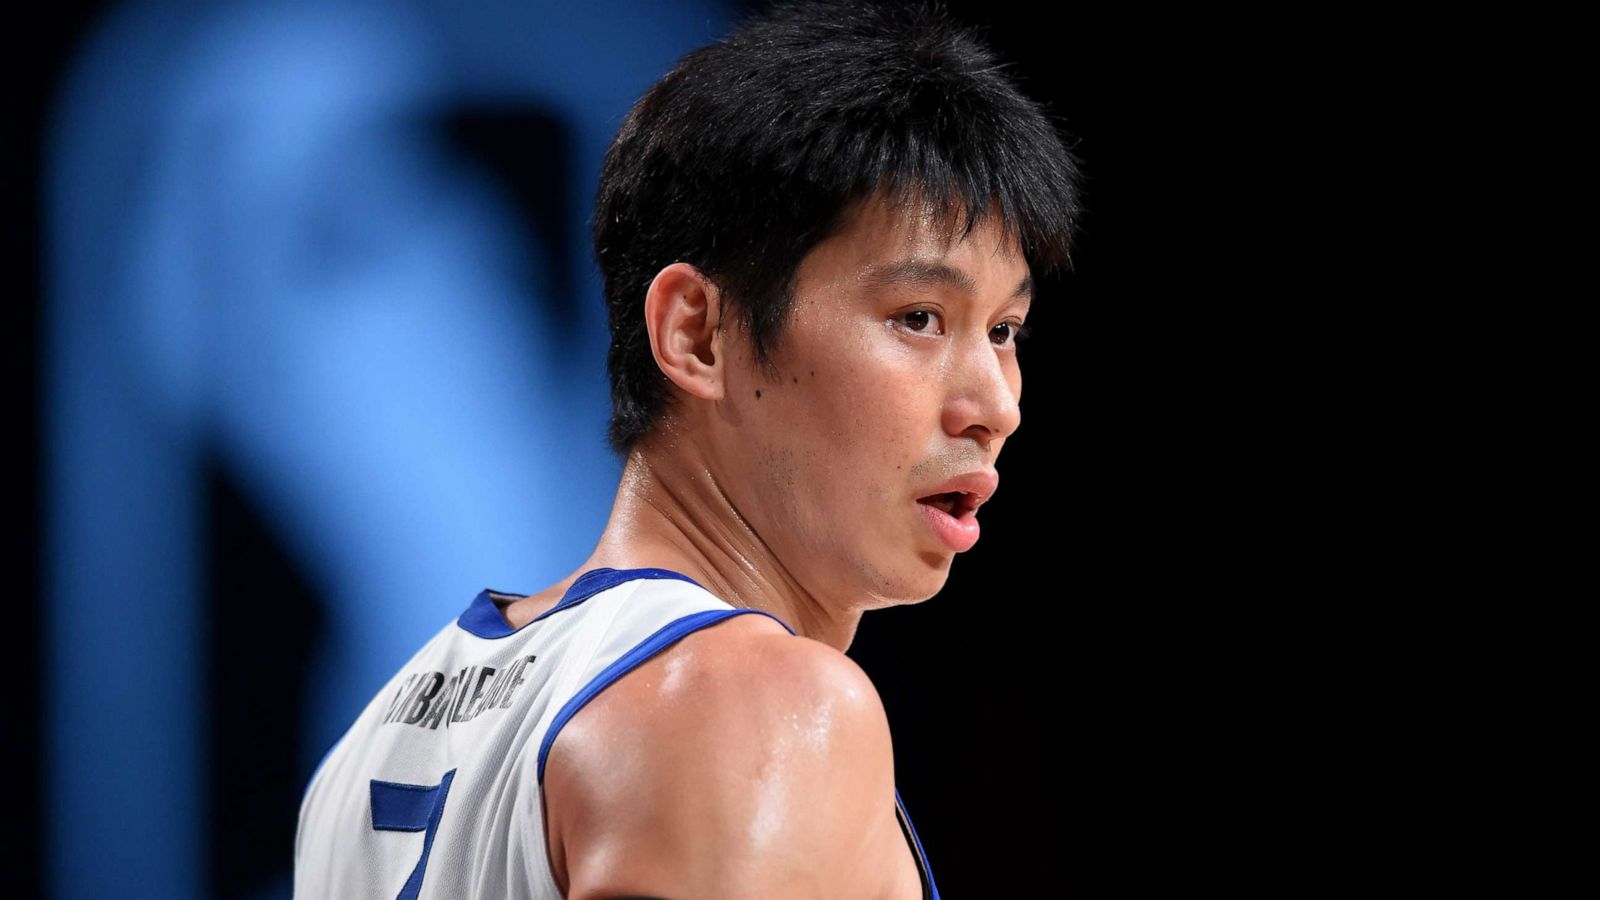 Jeremy Lin discussed how Asian Americans are facing discrimination